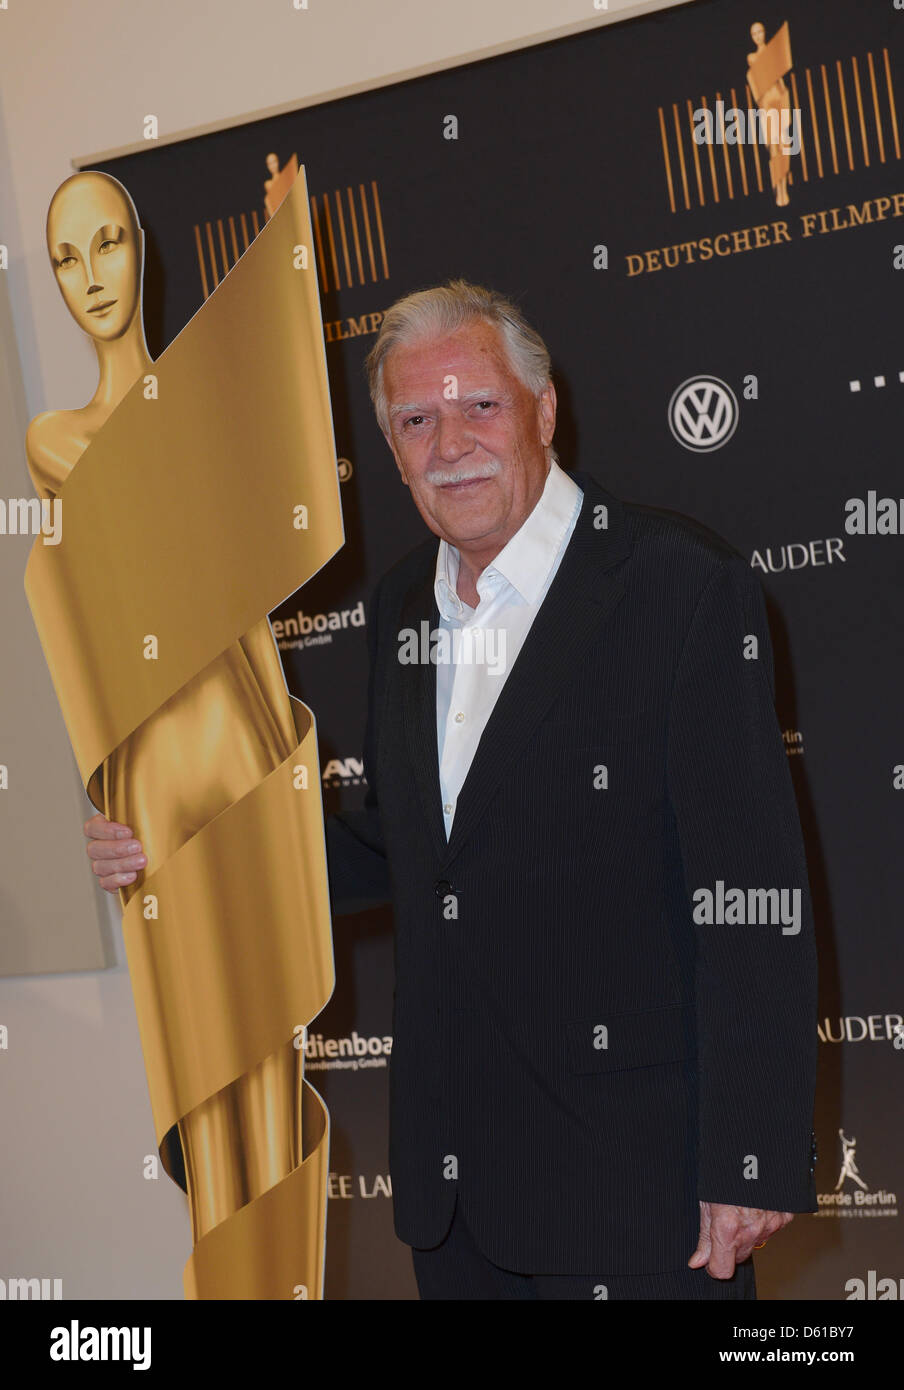 Camera man Michael Ballhaus arrives for the reception of the nominees for the German Film prize 2012 at the PanAm-Lounge of the House Eden in Berlin, Germany, 14 April 2012. The presentation of the German Film Prize will take place on 27 April 2012. Photo: Britta Pedersen Stock Photo